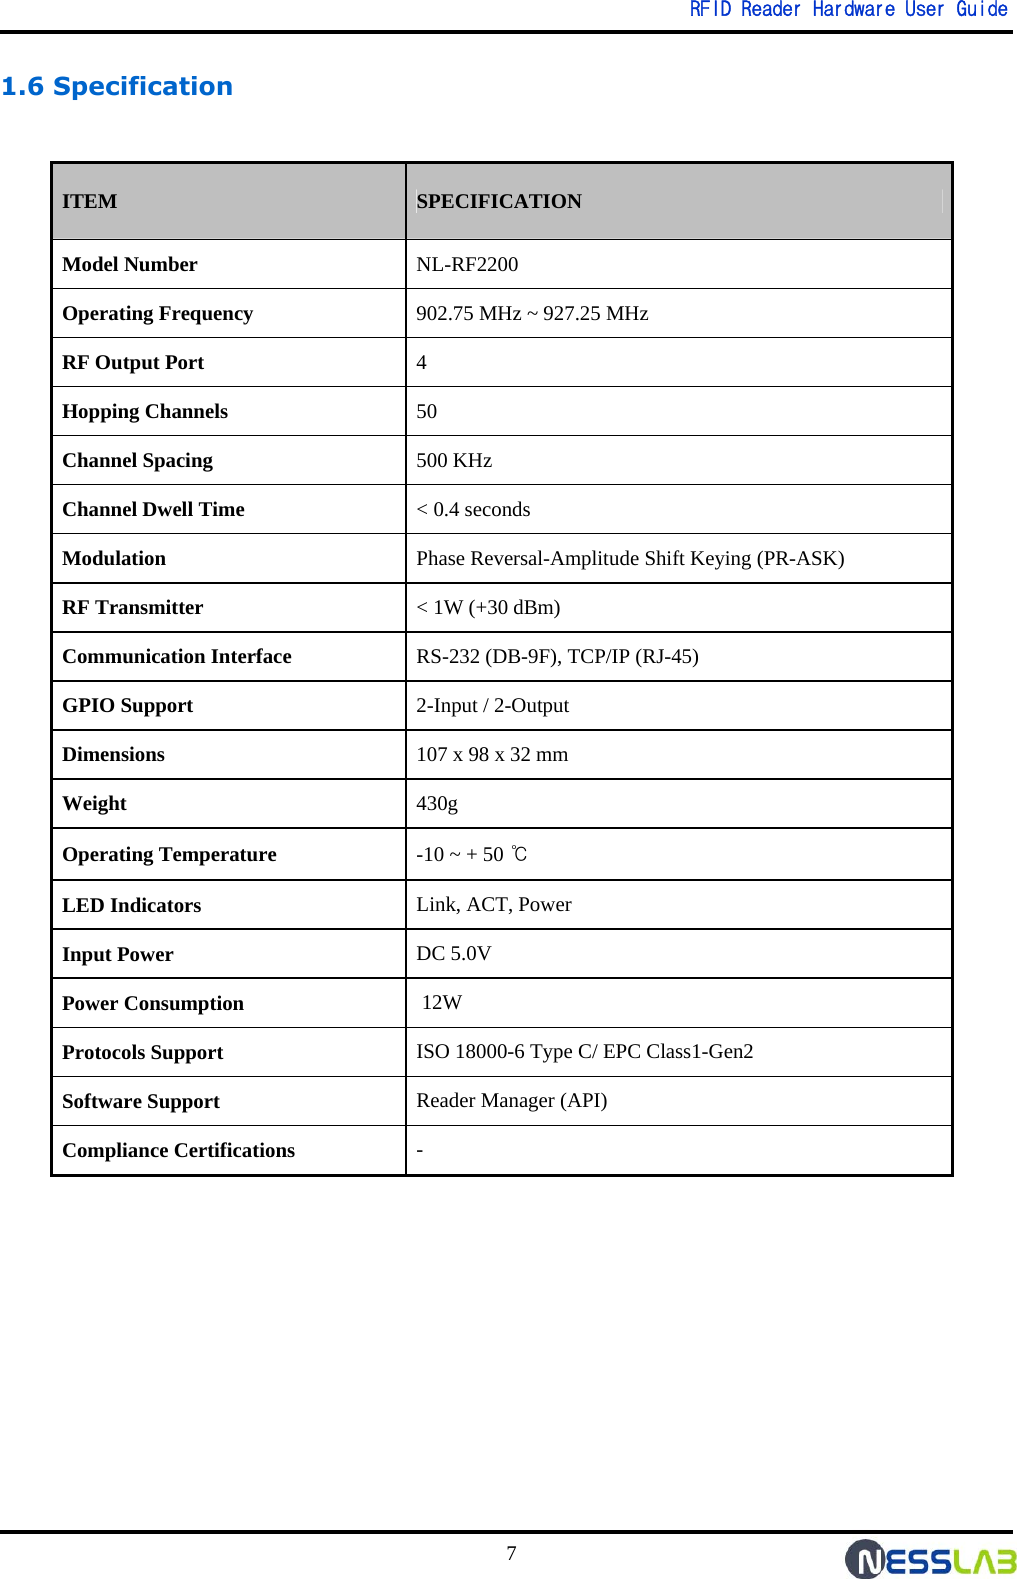   RFID Reader Hardware User Guide 7 1.6 Specification                ITEM SPECIFICATION Model Number NL-RF2200 Operating Frequency 902.75 MHz ~ 927.25 MHz RF Output Port 4  Hopping Channels 50 Channel Spacing 500 KHz Channel Dwell Time  &lt; 0.4 seconds Modulation Phase Reversal-Amplitude Shift Keying (PR-ASK) RF Transmitter &lt; 1W (+30 dBm) Communication Interface RS-232 (DB-9F), TCP/IP (RJ-45) GPIO Support  2-Input / 2-Output  Dimensions 107 x 98 x 32 mm Weight 430g Operating Temperature  -10 ~ + 50 ℃ LED Indicators Link, ACT, Power Input Power  DC 5.0V Power Consumption  12W Protocols Support  ISO 18000-6 Type C/ EPC Class1-Gen2 Software Support  Reader Manager (API) Compliance Certifications  - 